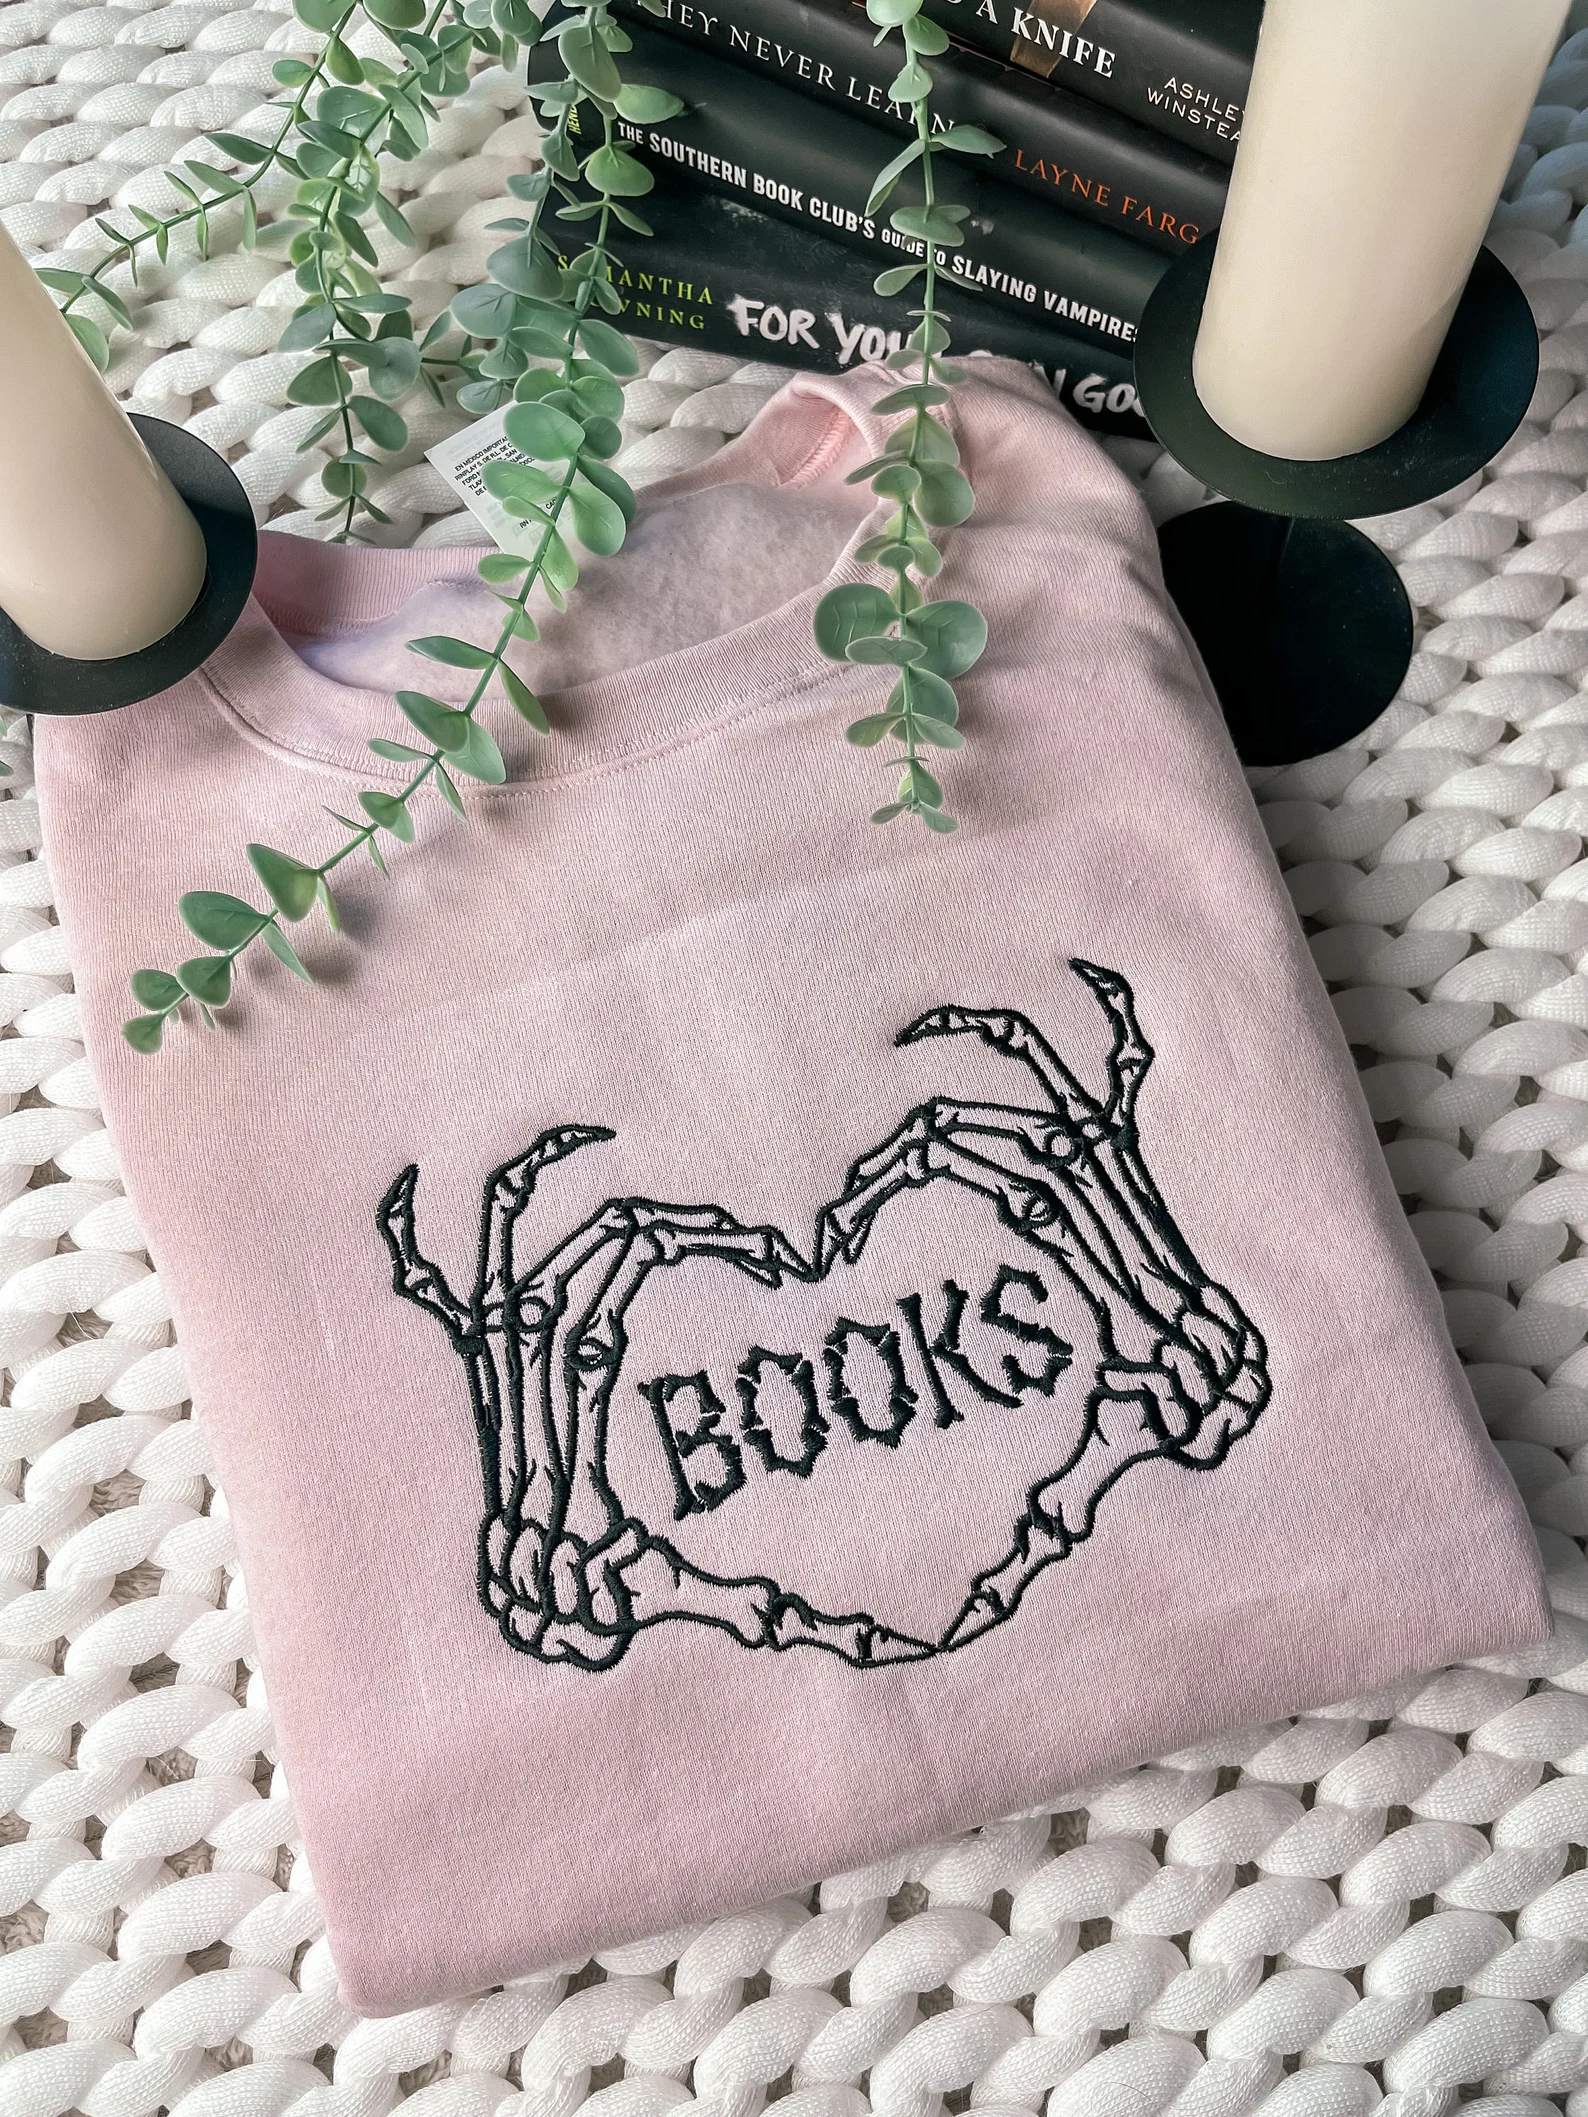 Image of a lilac colored sweatshirt. Embroidered on it are two skeleton hands in the shape of a heart with the word "books" between them. 